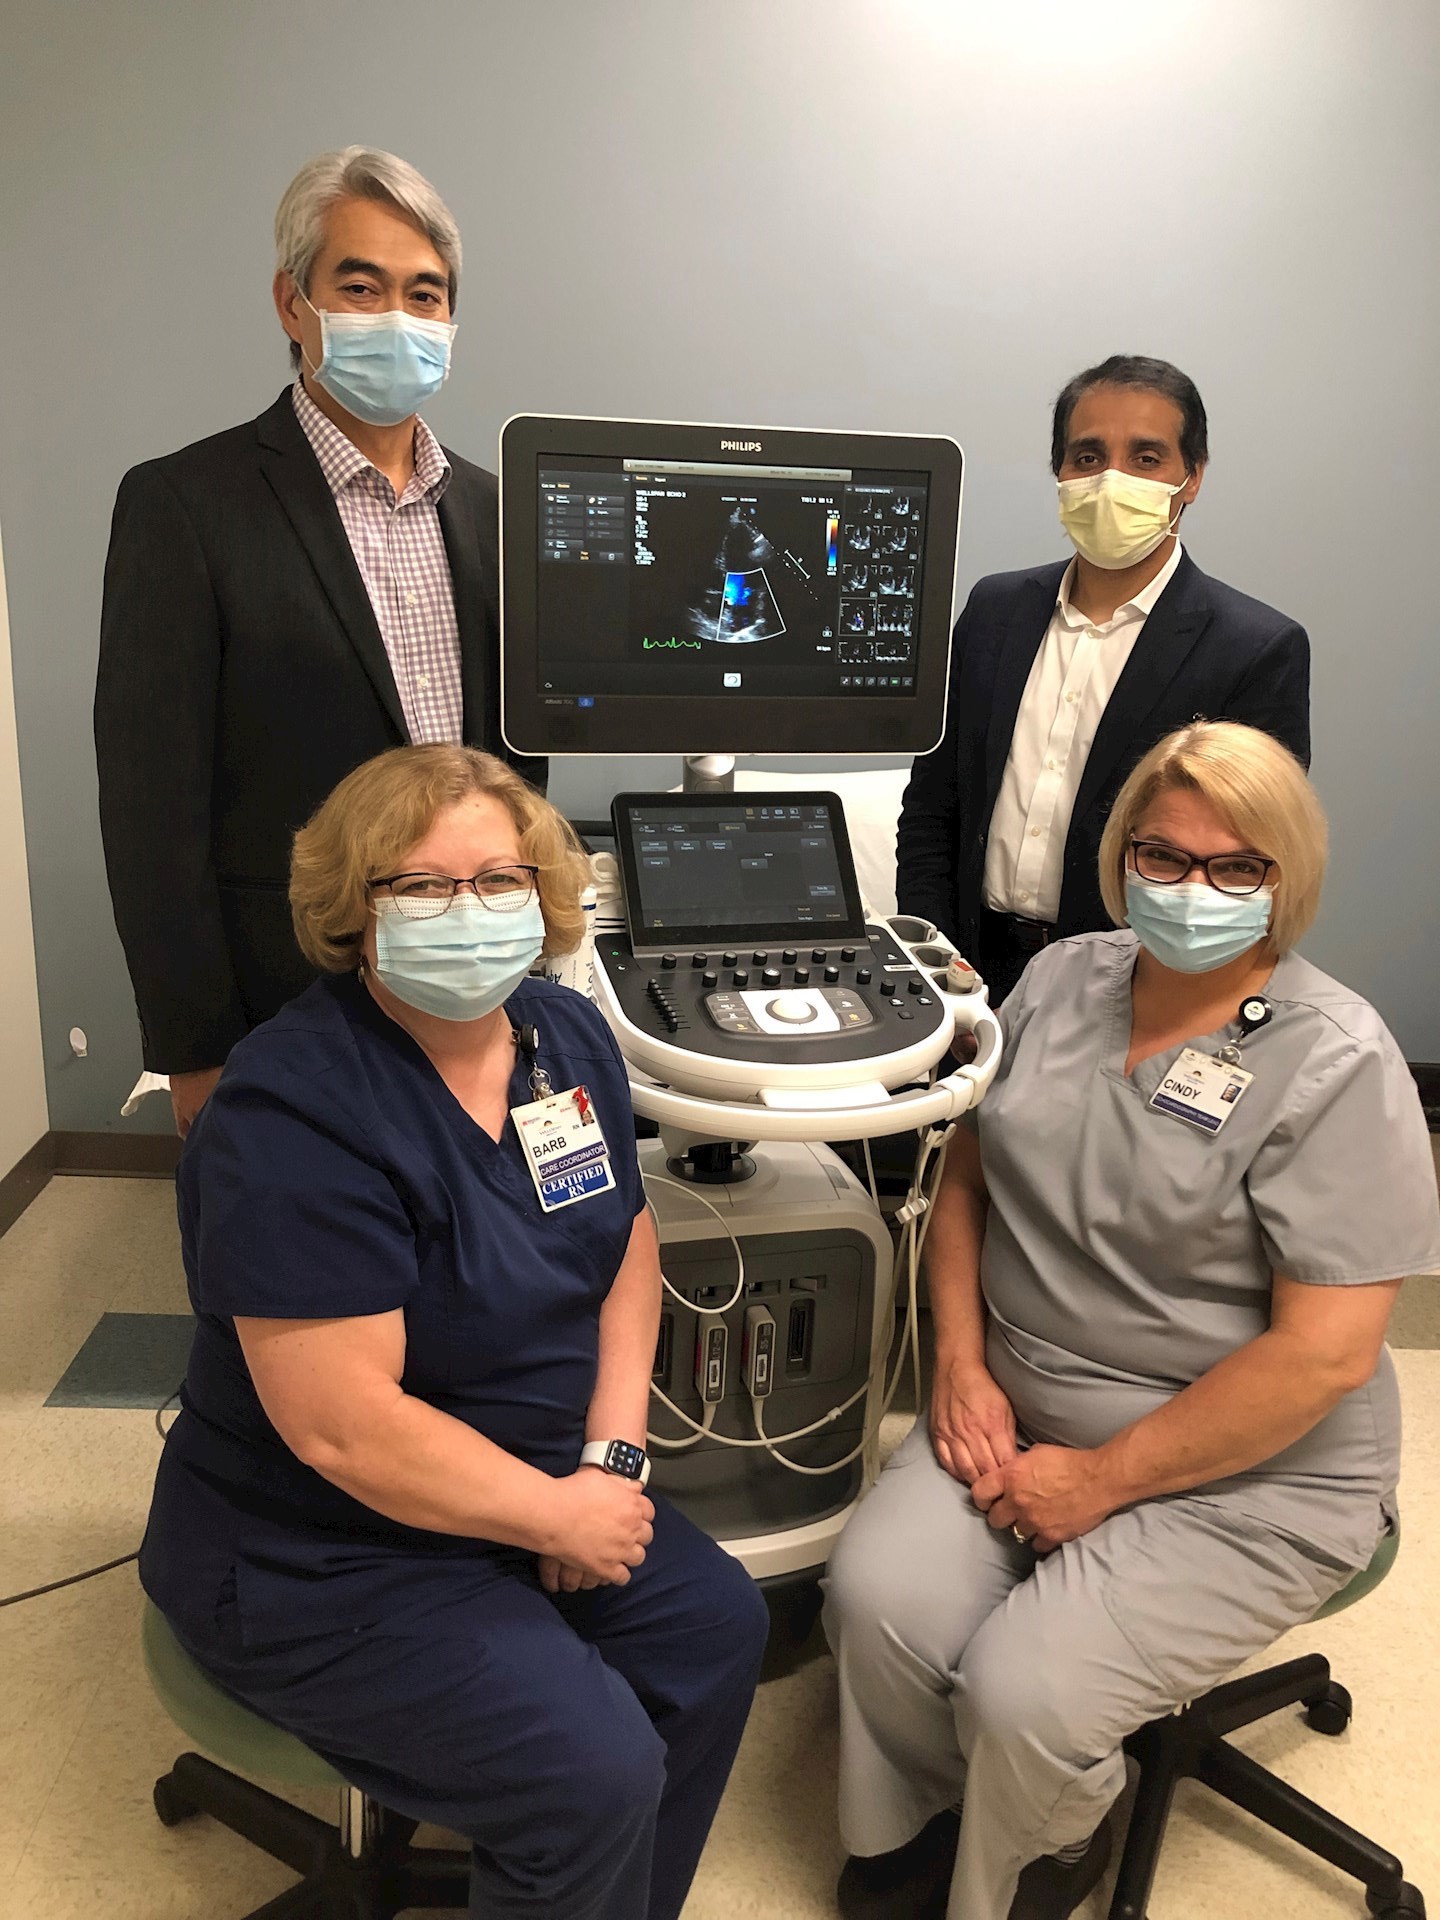 The WellSpan cardiac team that helped to save Susan Sensenig's life include (from top left, clockwise) Dr. Julian Esteban, Dr. C. Anwar A. Chahal, cardiac sonographer Cindy Lepard and registered nurse Barb Strock, with a monitor showing an echocardiogram.